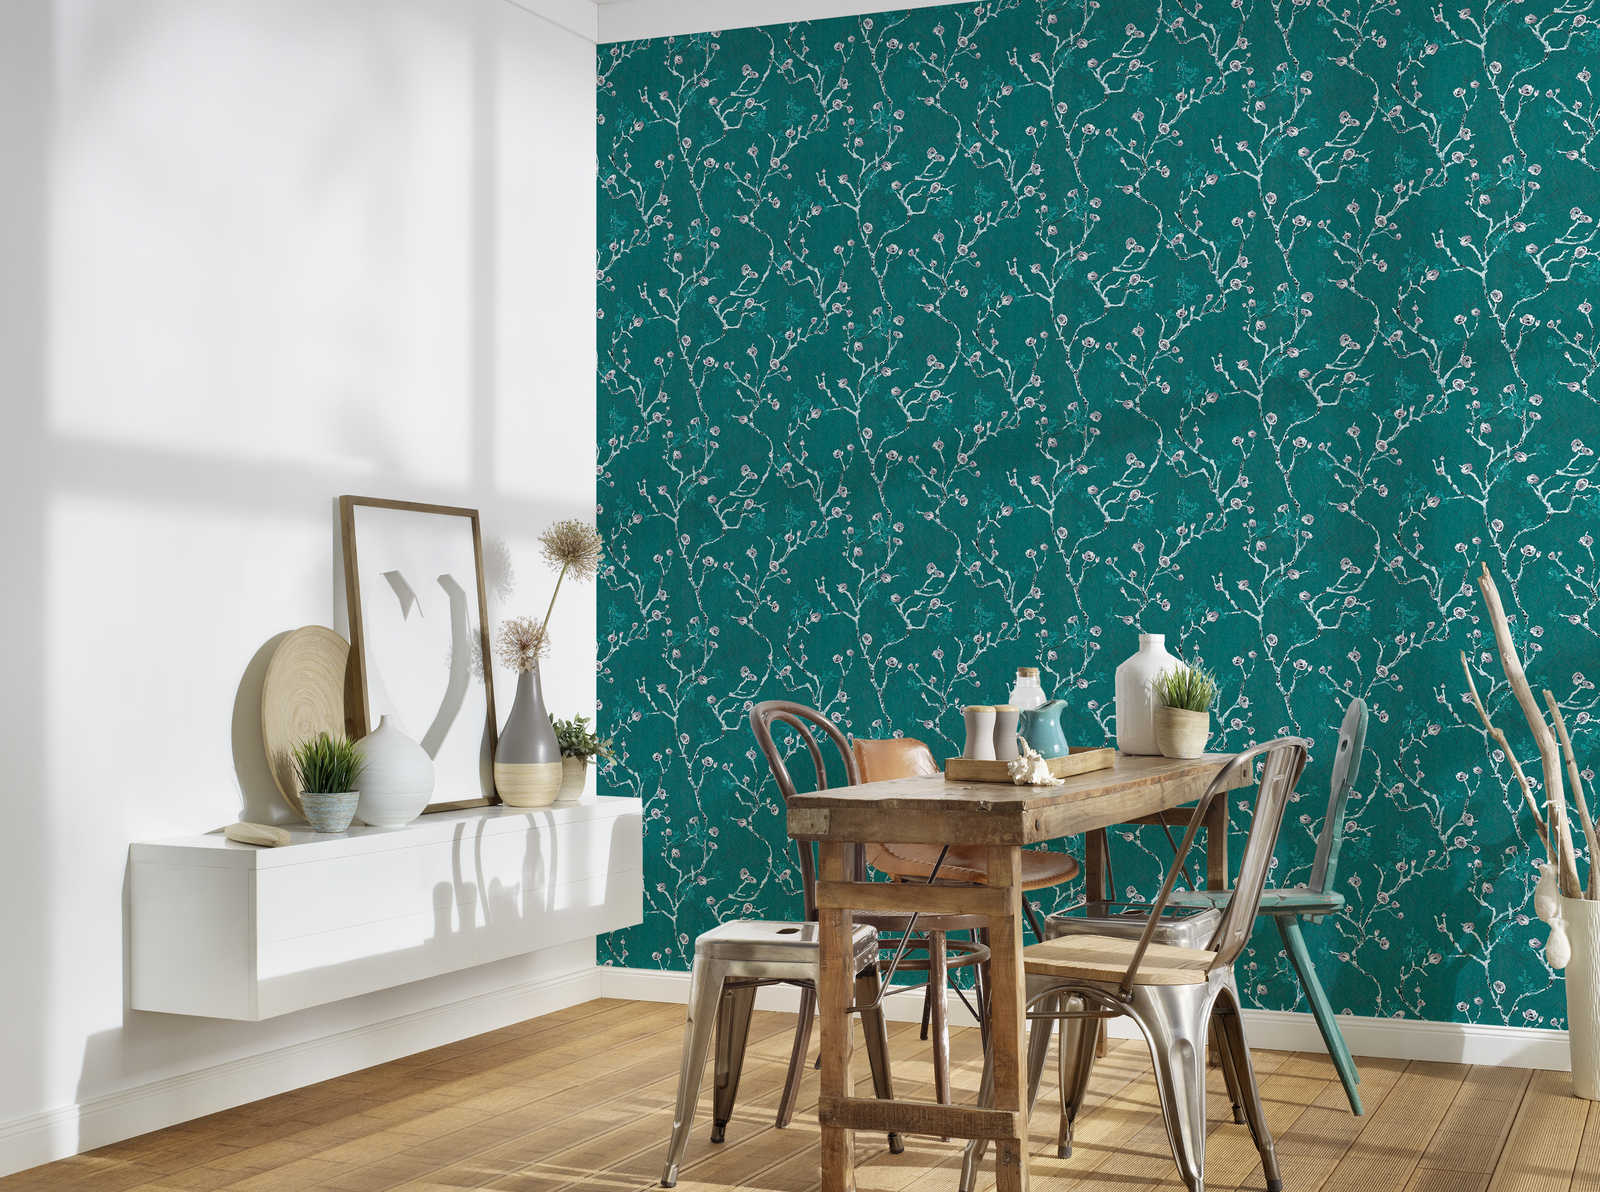             Dark green wallpaper with flowers motif in Asia style
        